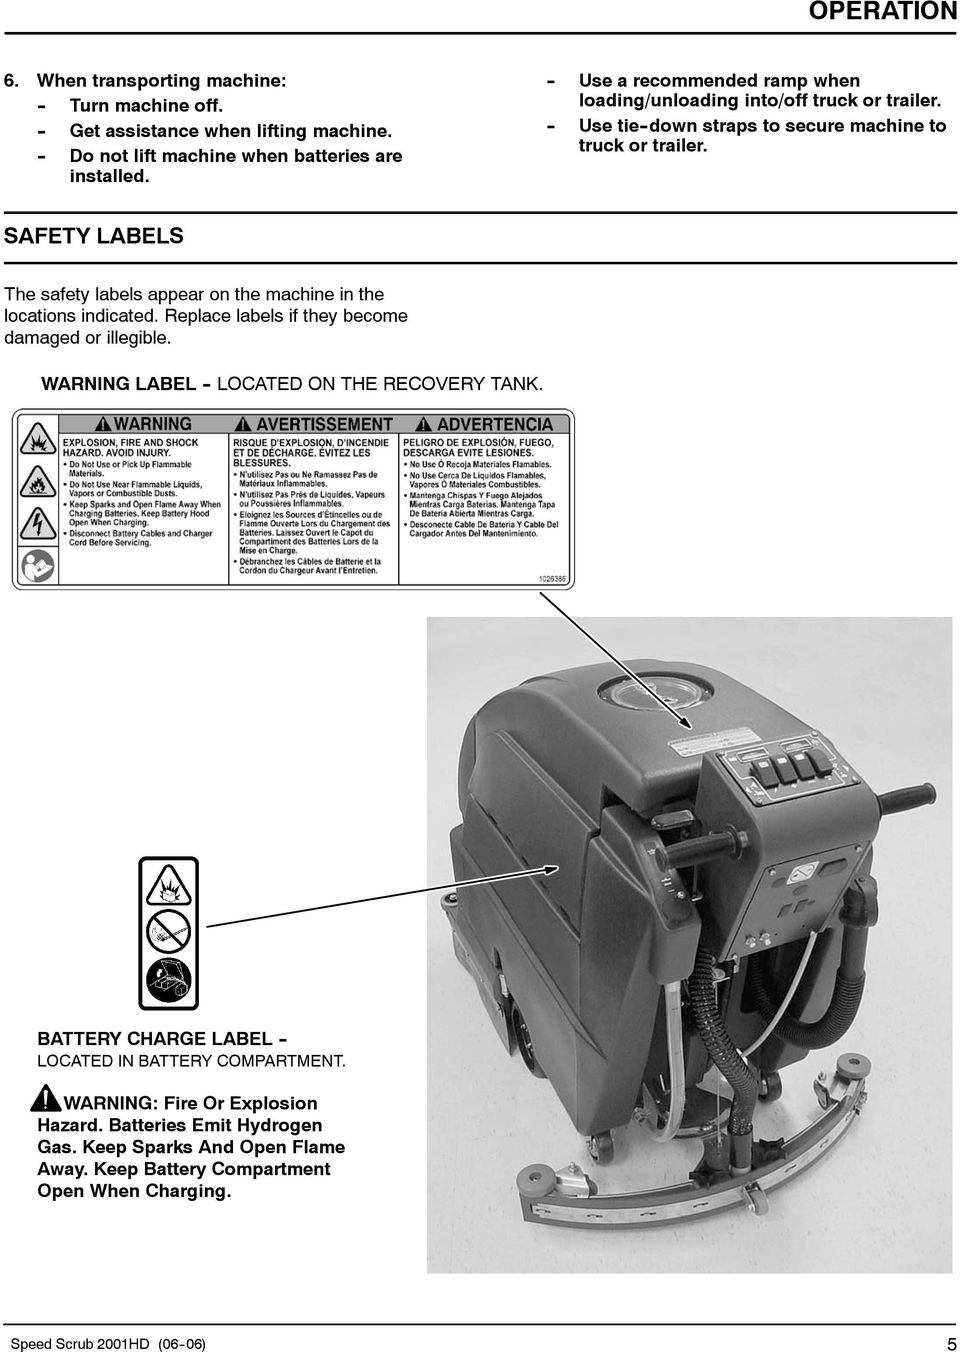 SAFETY LABELS The safety labels appear on the machine in the locations indicated. Replace labels if they become damaged or illegible.